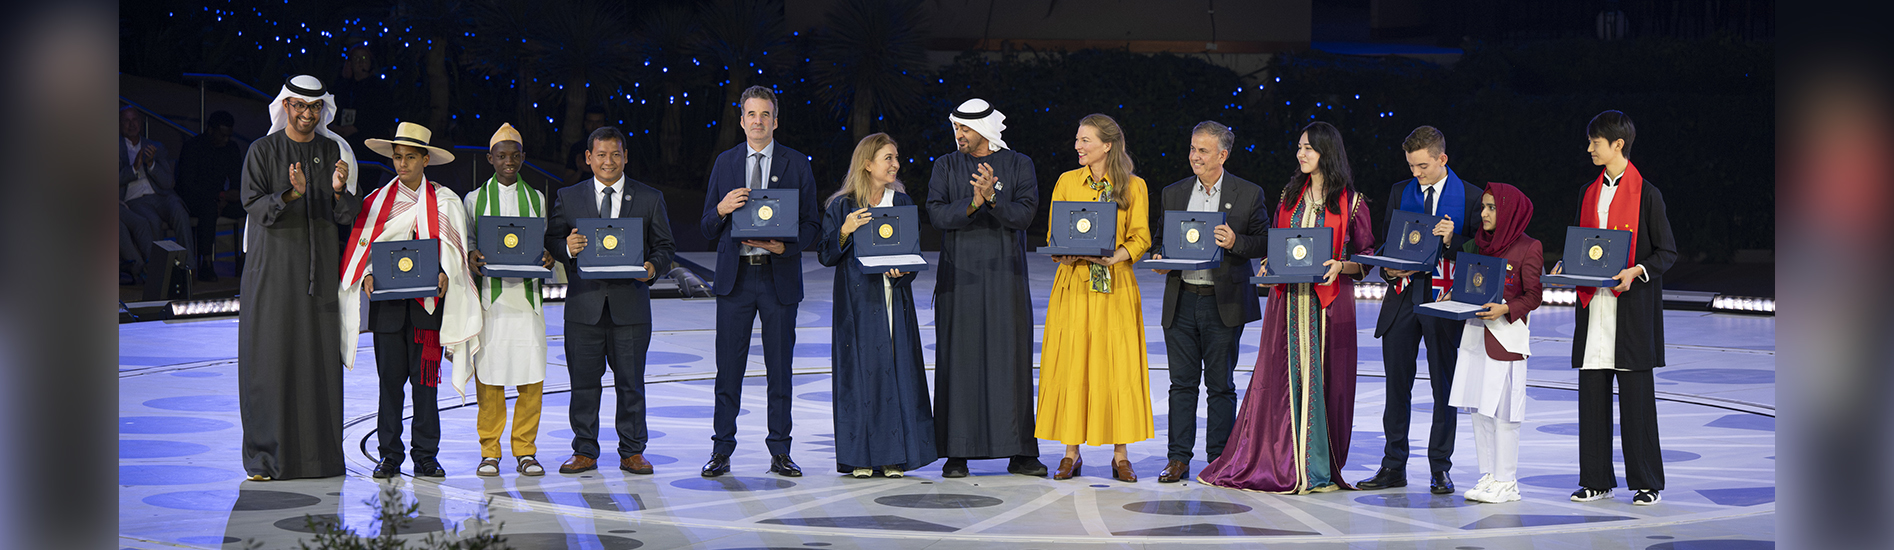 11 Winners Recognised at Zayed Sustainability Prize Awards Ceremony held during COP28 UAE